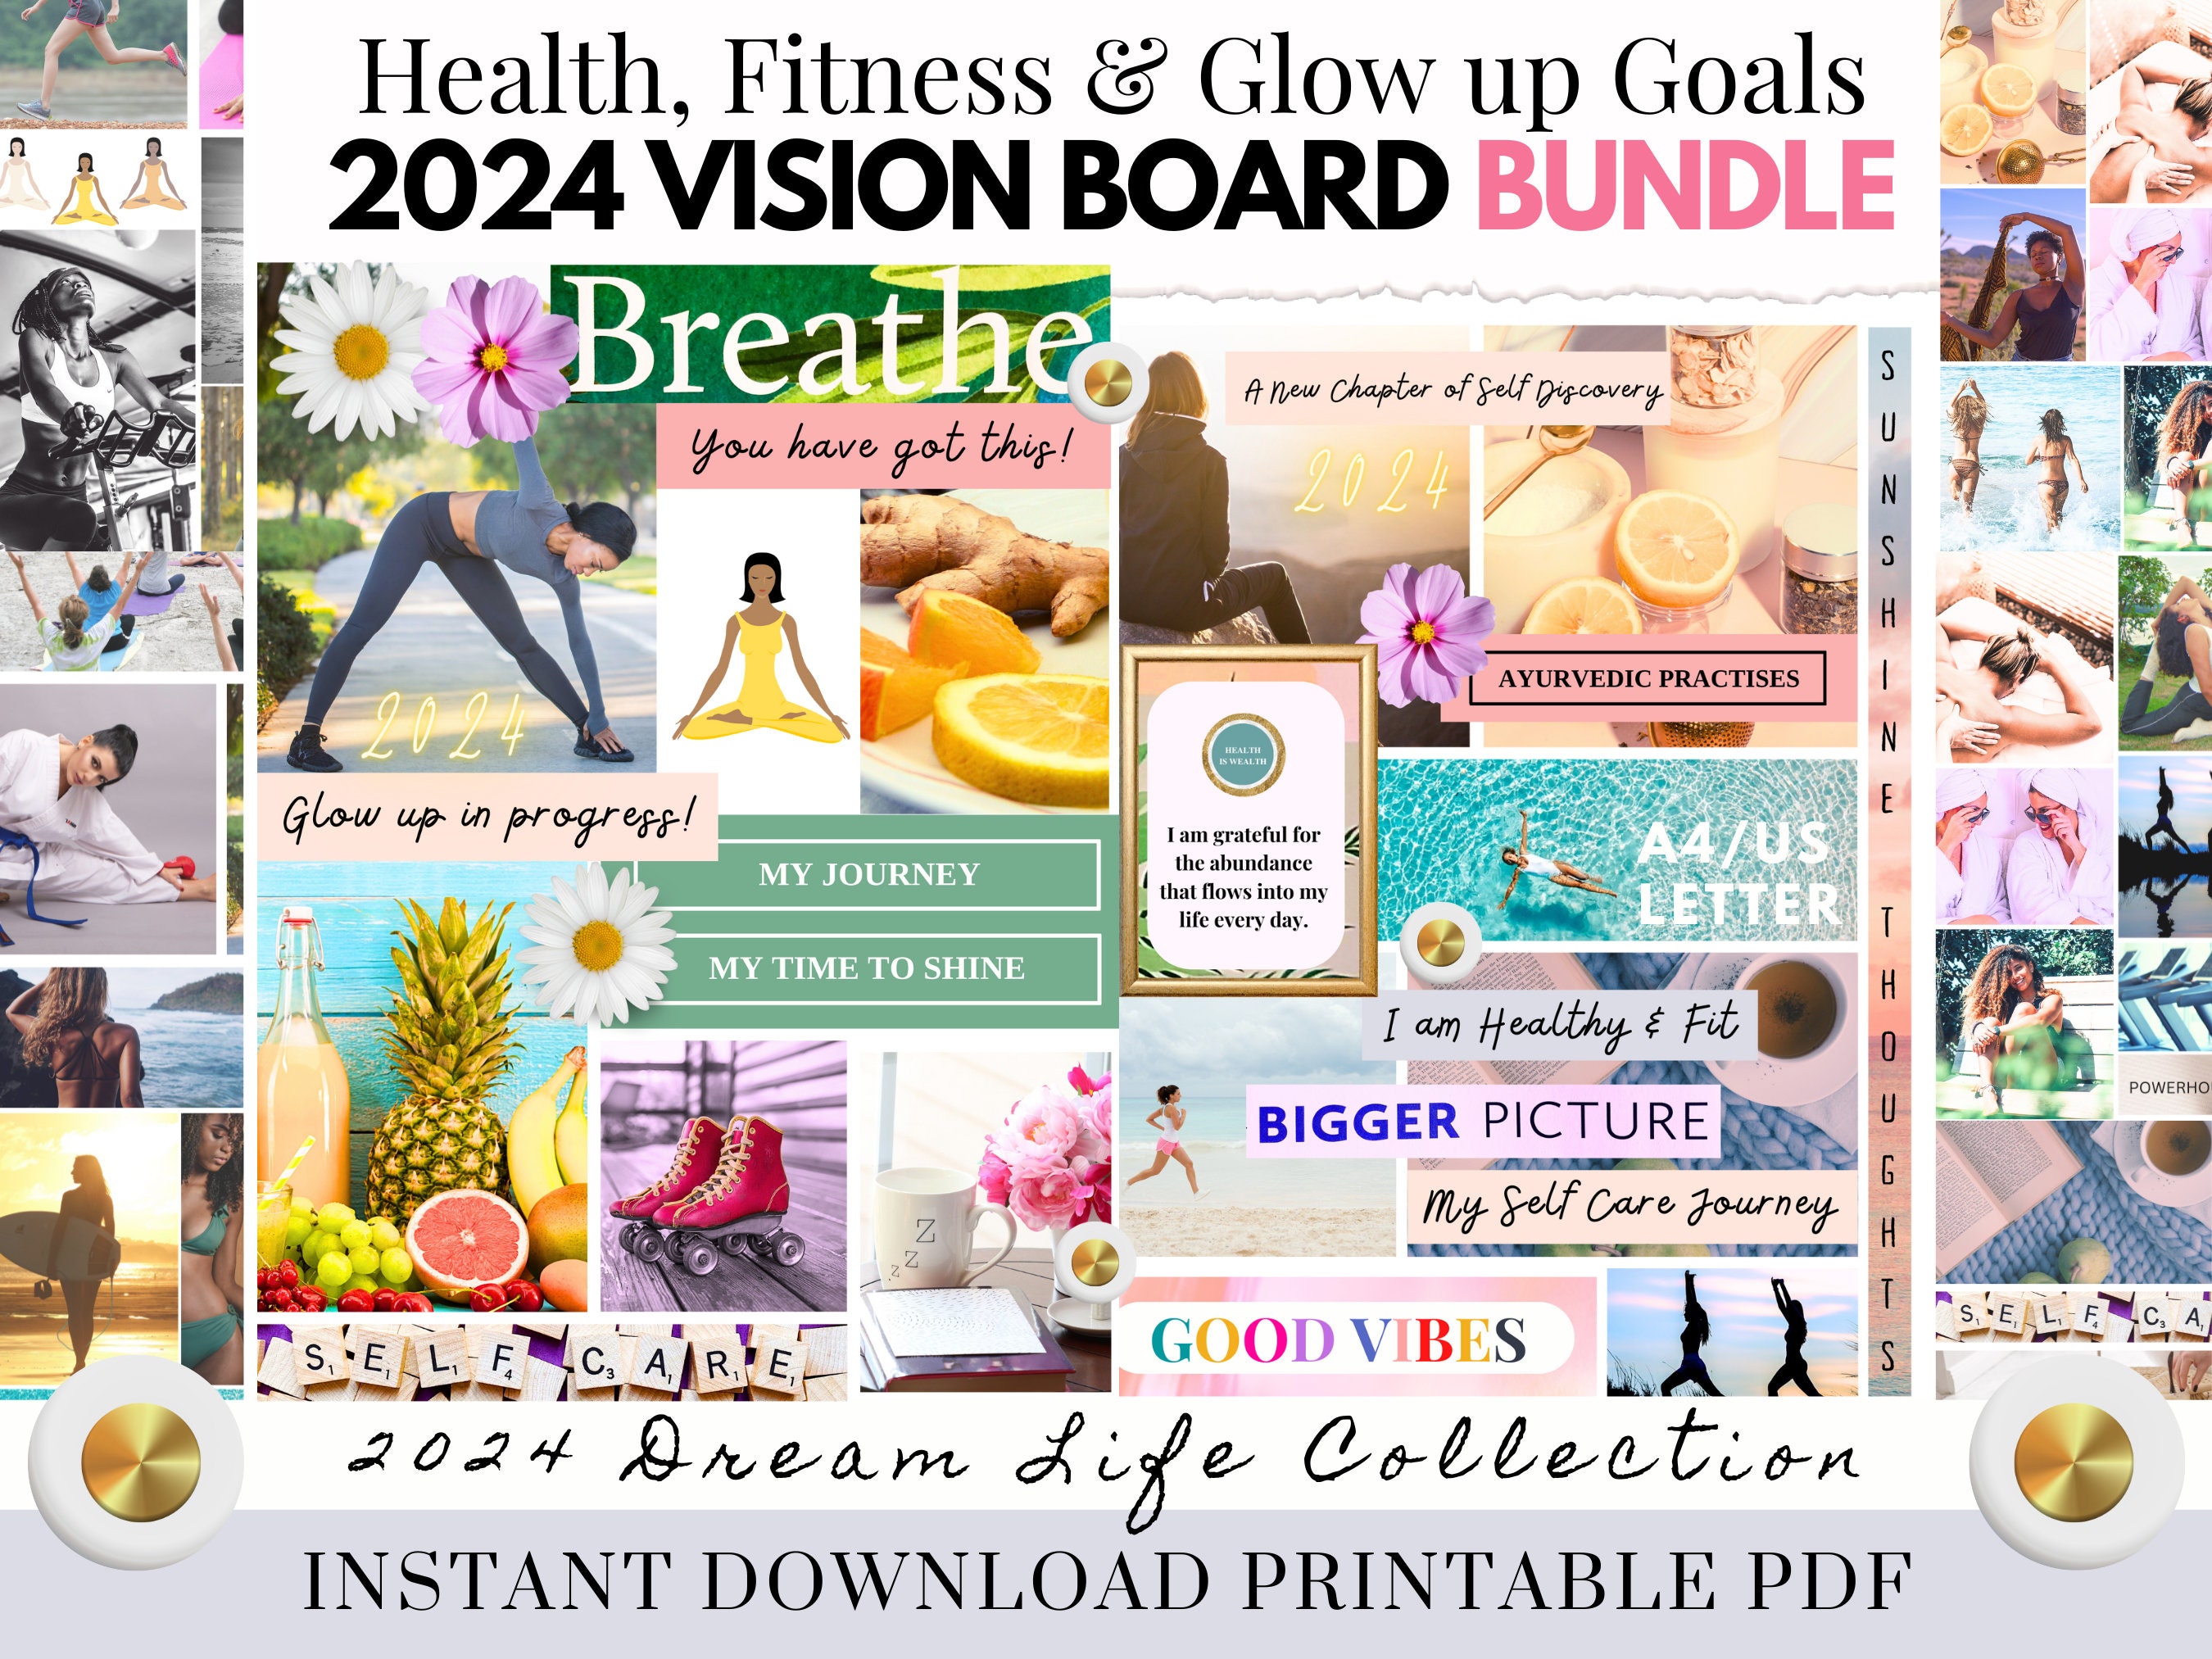 2024 Vision Board Clip Art Book: Create Your Awesome 2024 with Vision Board Supplies from 500+ Pictures, Quotes and Affirmations for Women | Reach